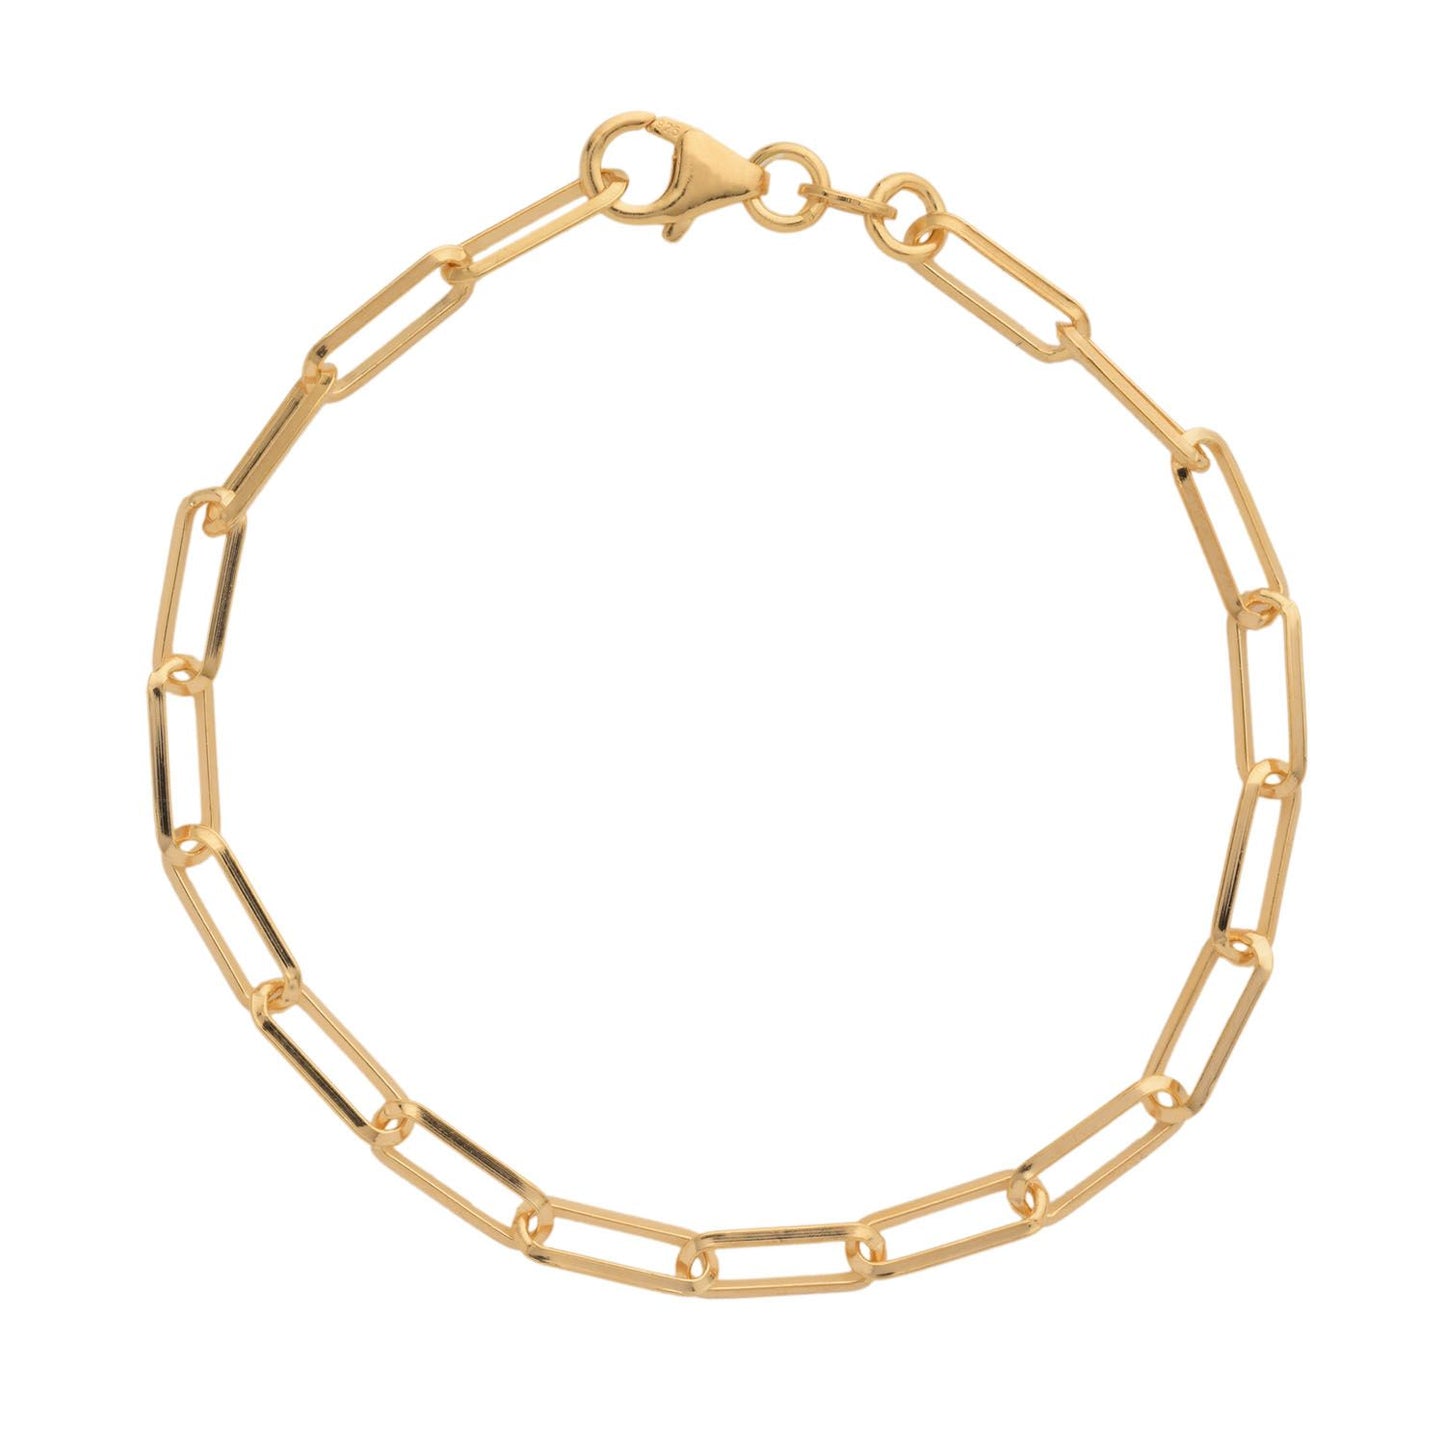 Paperclip Chain - gold plated sterling silver - 18" ECO Chain Necklace